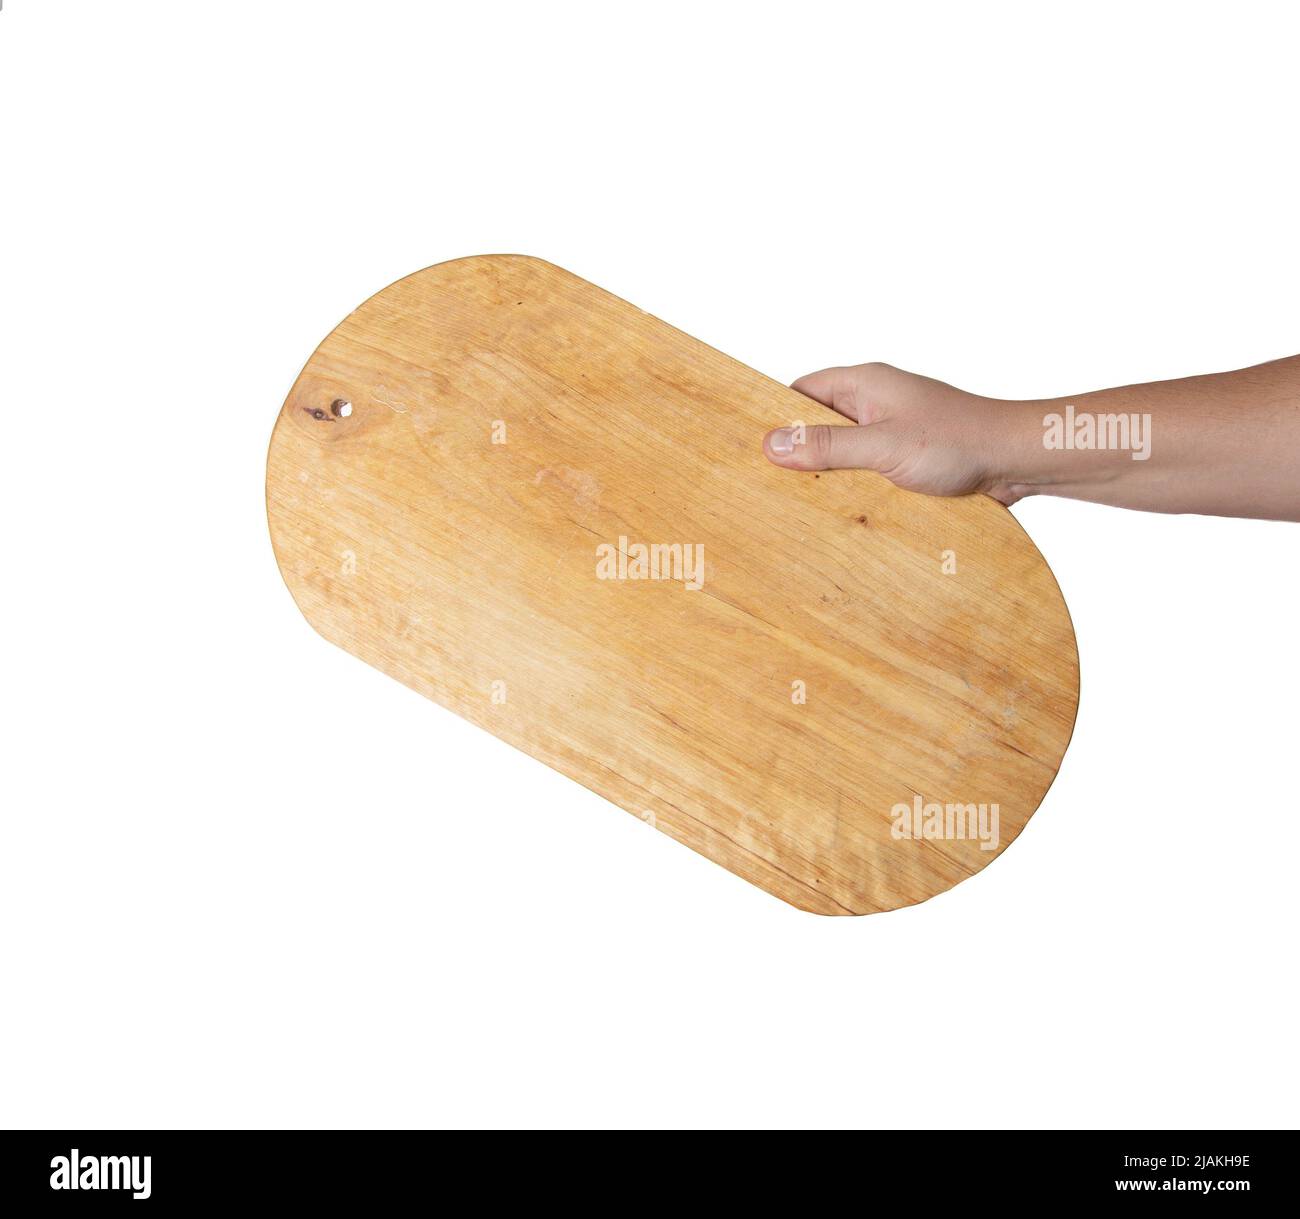 kitchen board for cutting meat in a man's hand on a white background, isolate. Close-up, object Stock Photo